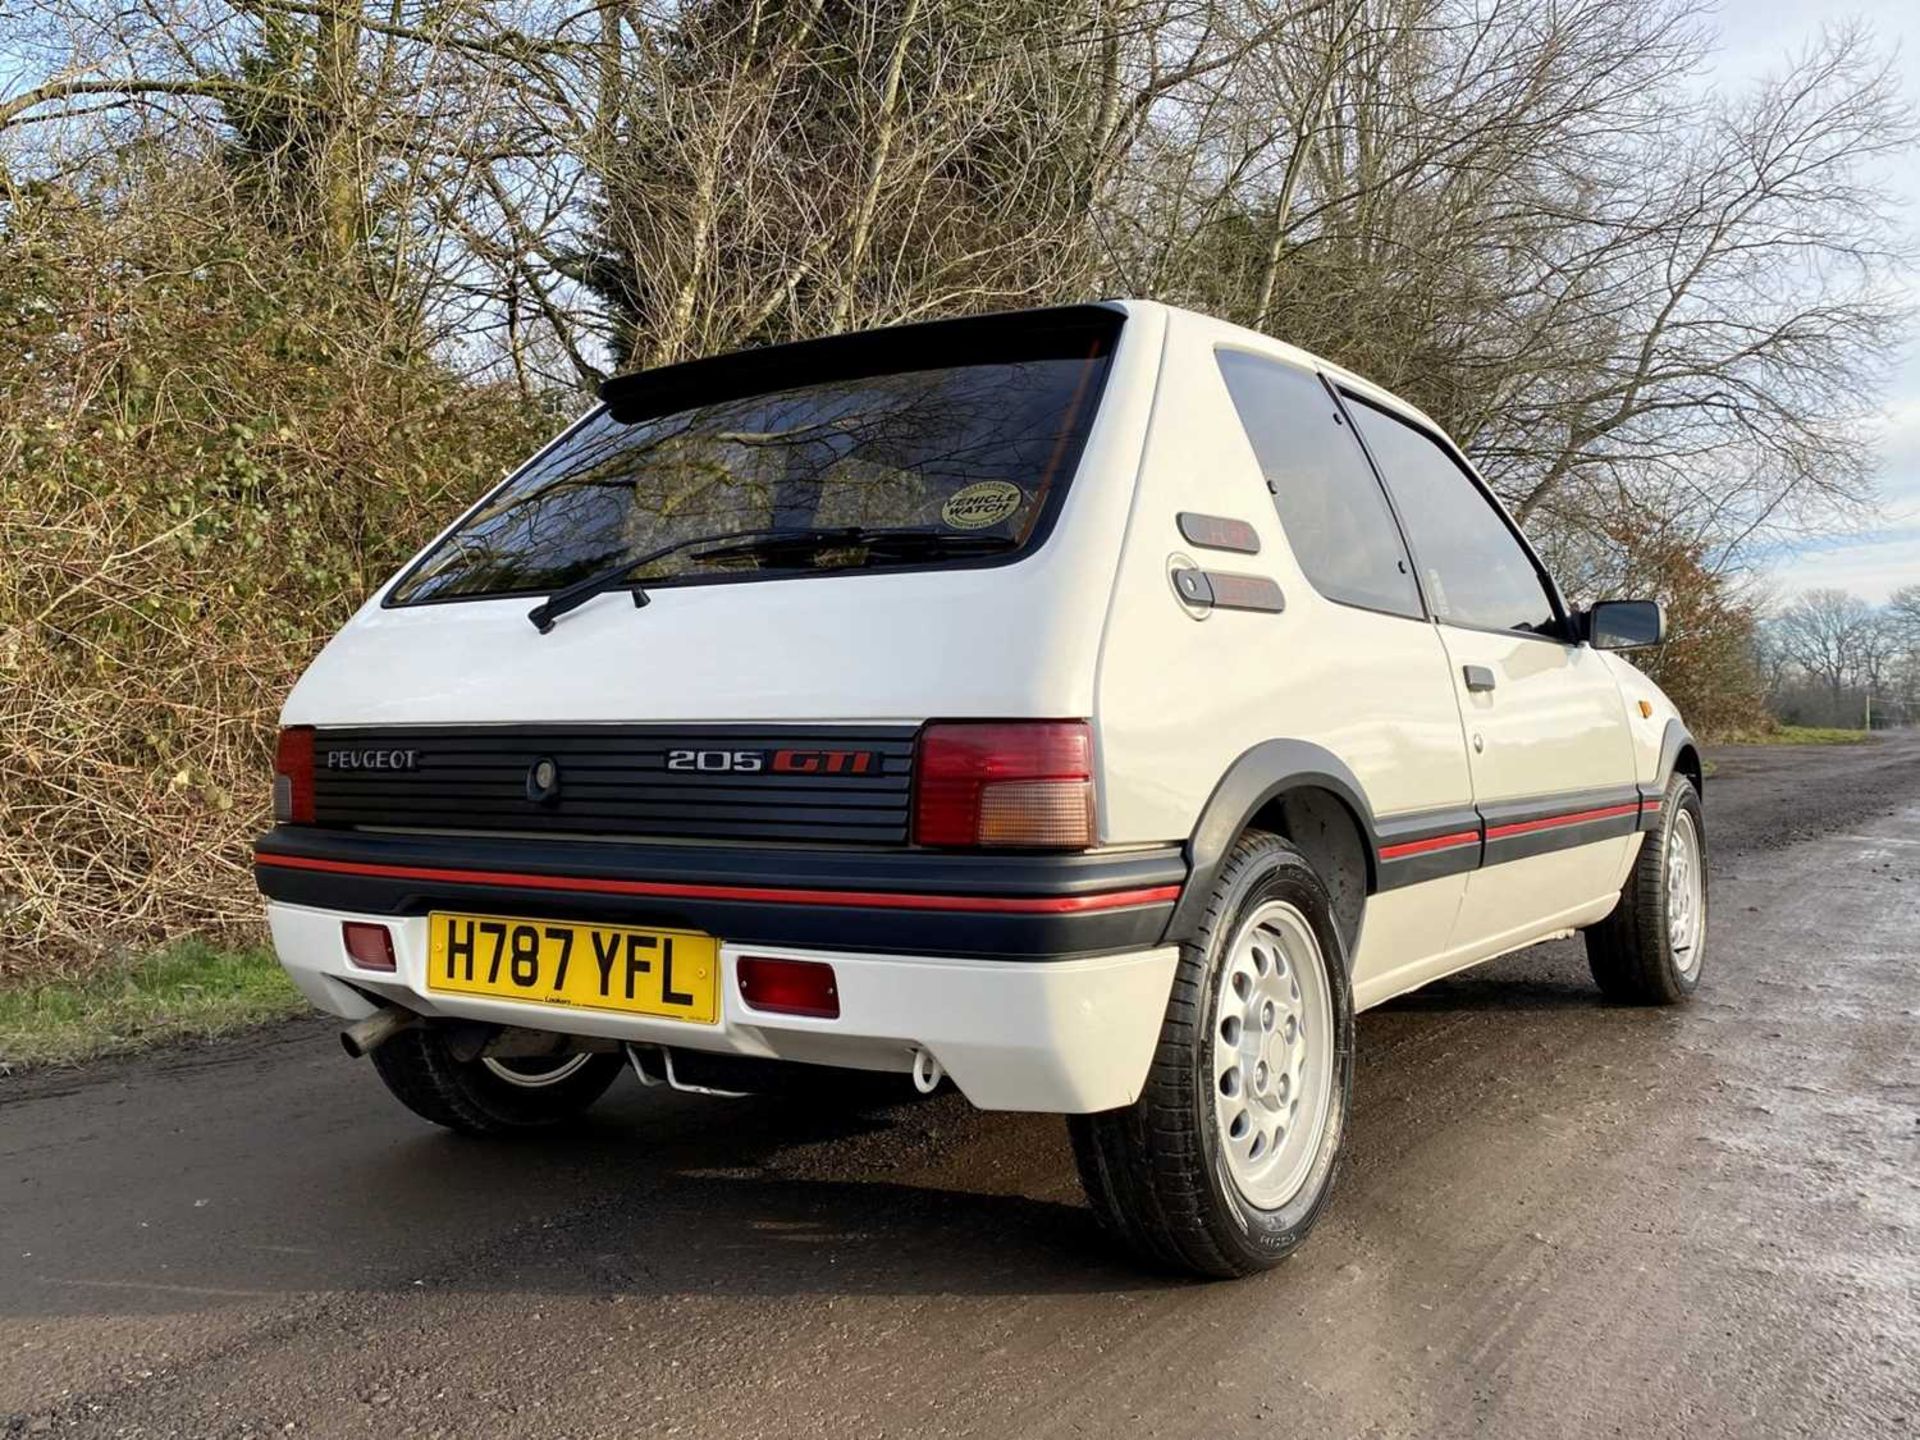 1990 Peugeot 205 GTi 1.6 Only 56,000 miles, same owner for 16 years - Image 19 of 81